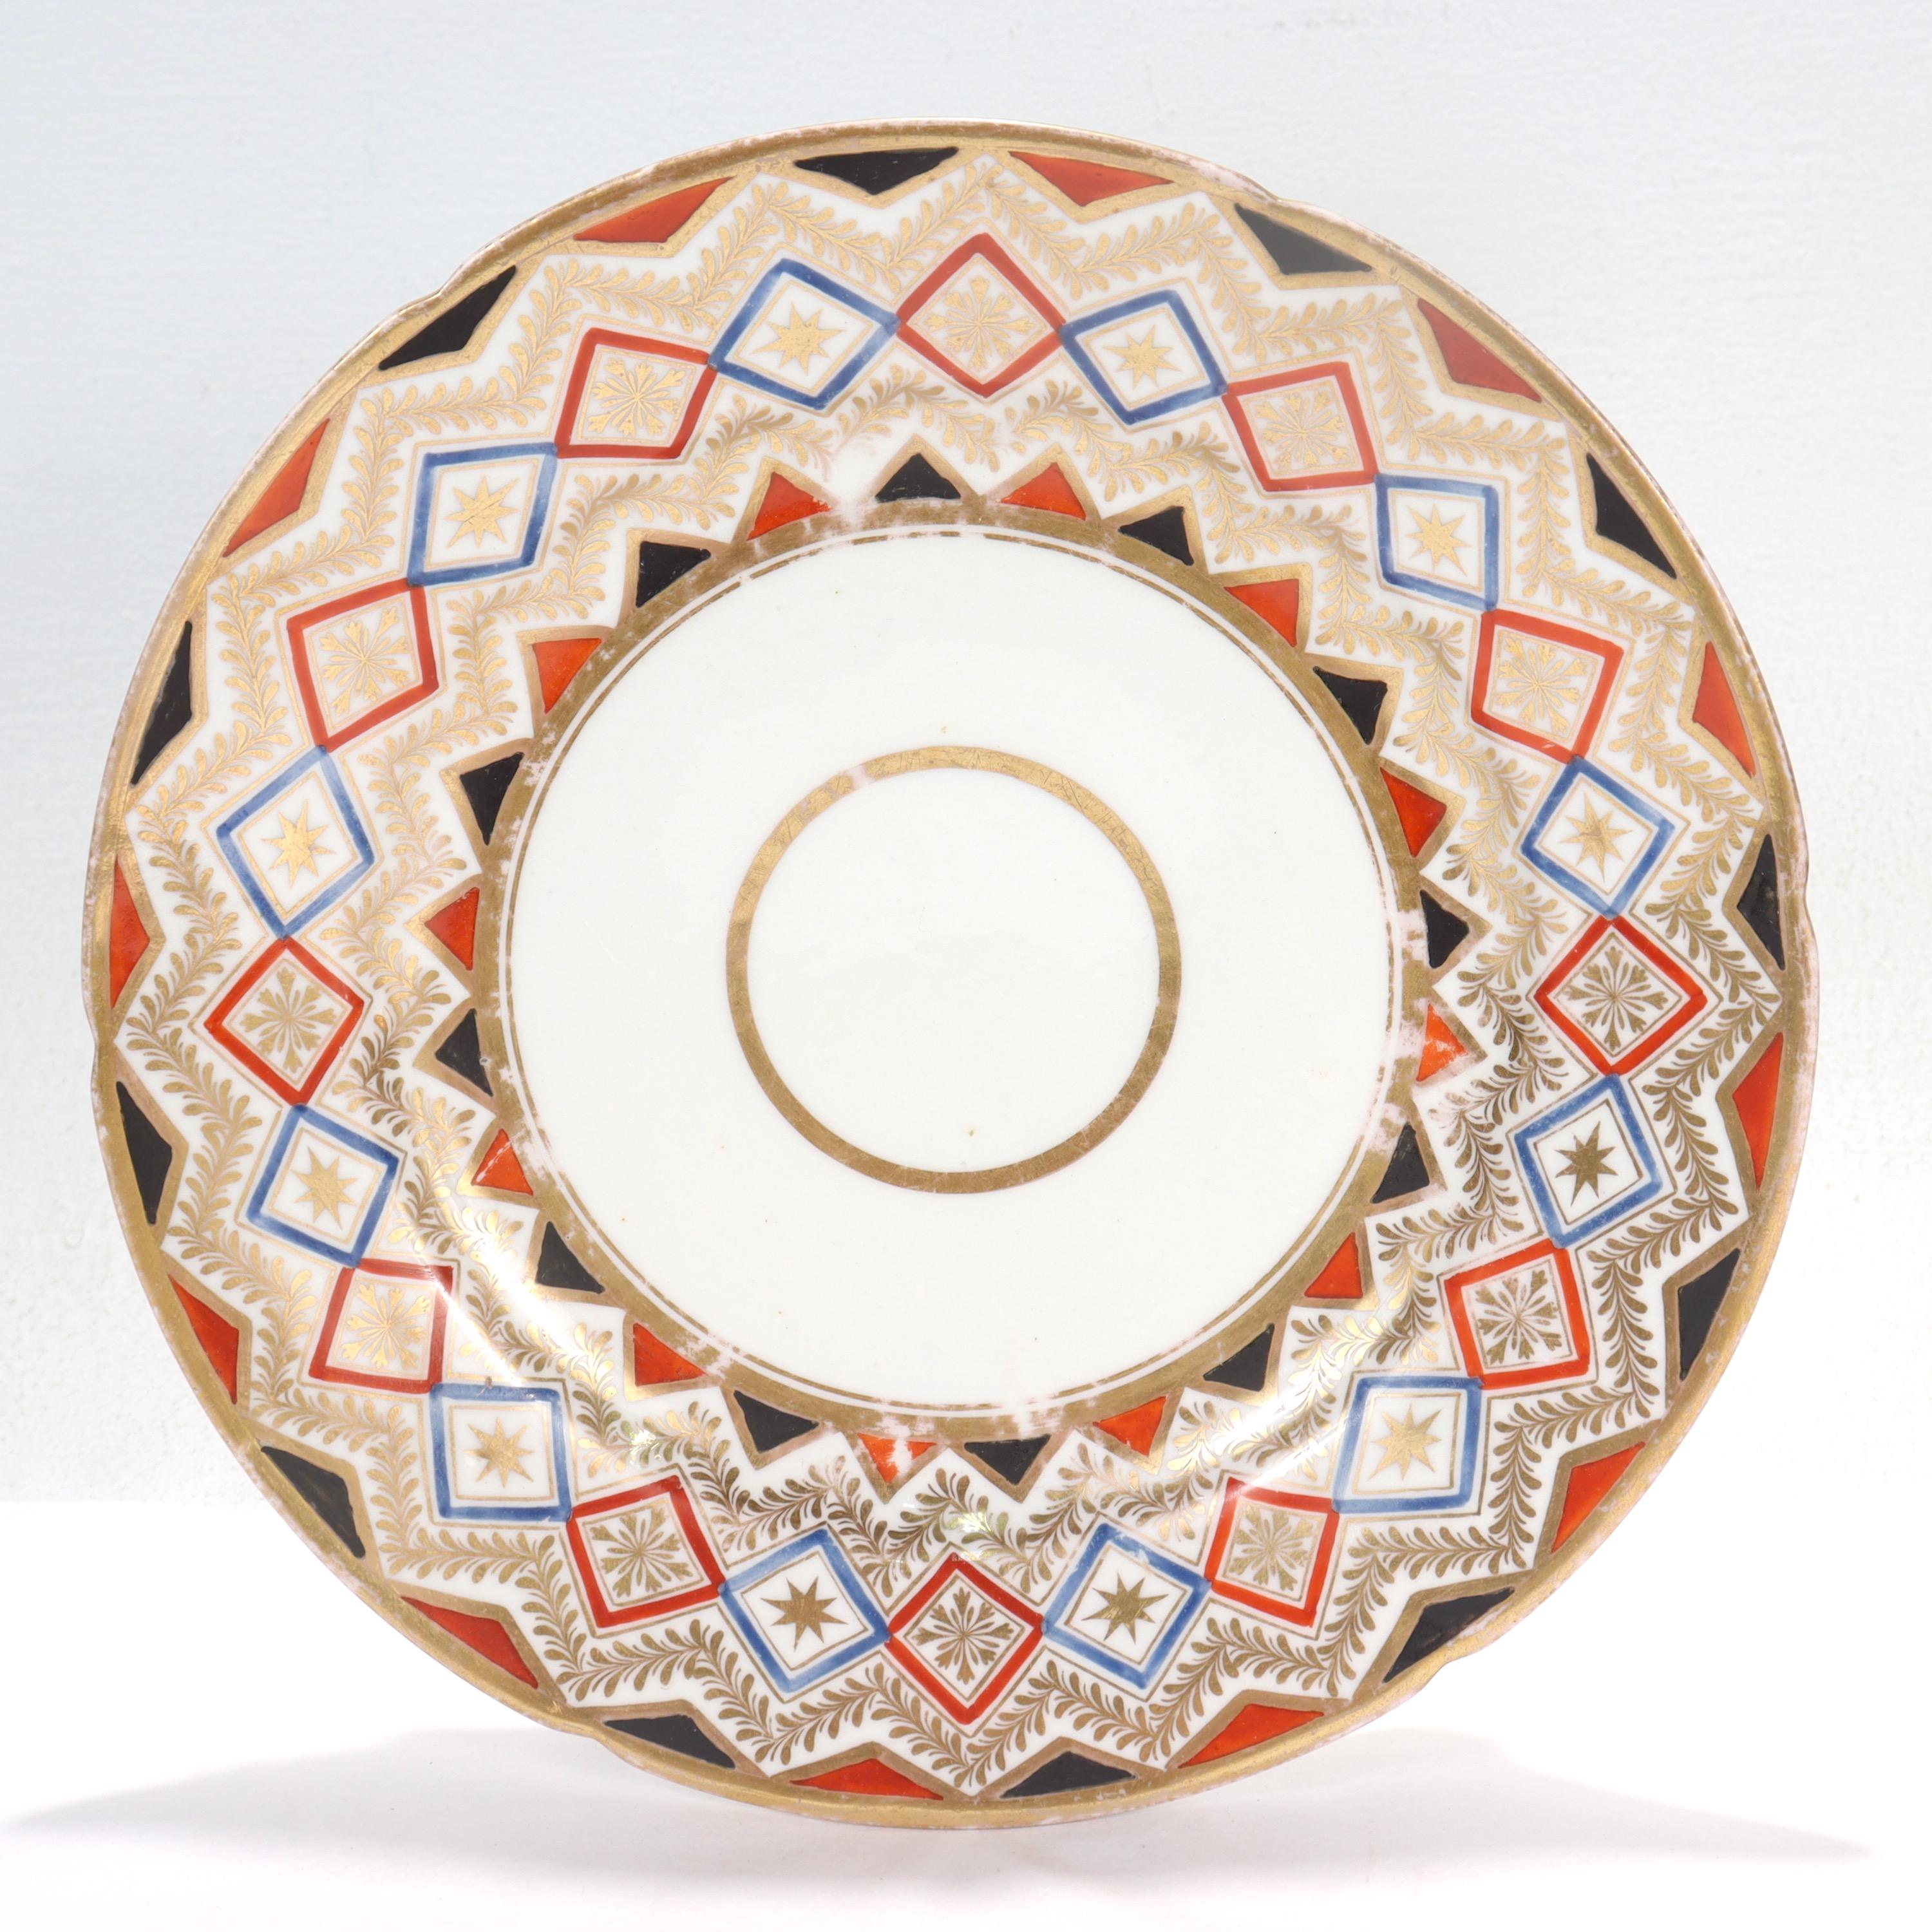 A fine English Neoclassical porcelain plate.

By Coalport.

Decorated throughout with alternating red and blue geometric patterns, gilt garlands, and gilt highlights in general.

Simply a great Coalport porcelain plate!

Date:
19th Century,